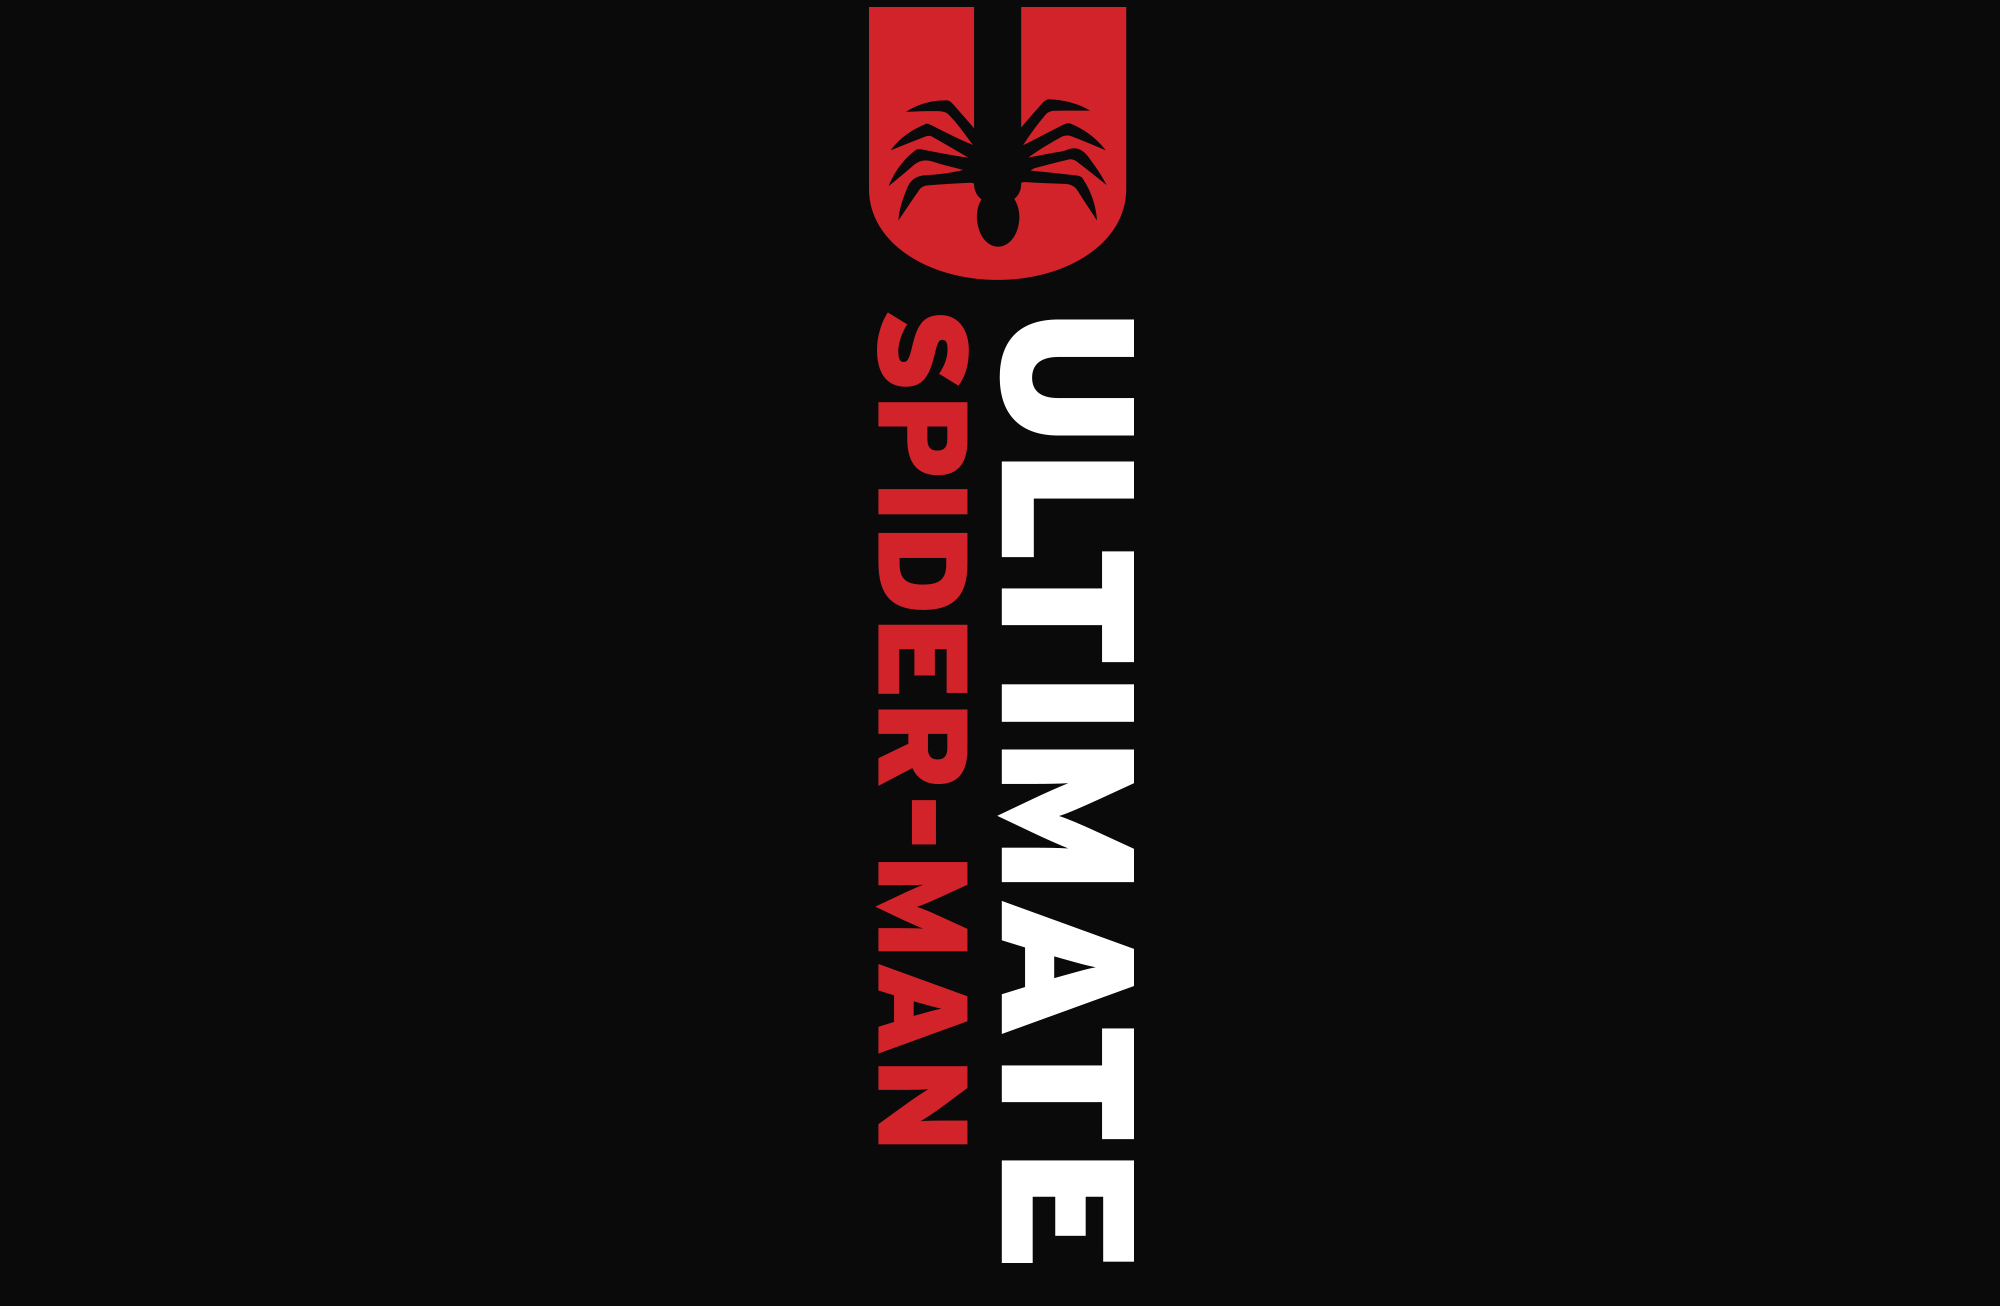 'Ultimate Spider-Man' relaunching by Jonathan Hickman and Marco Checchetto